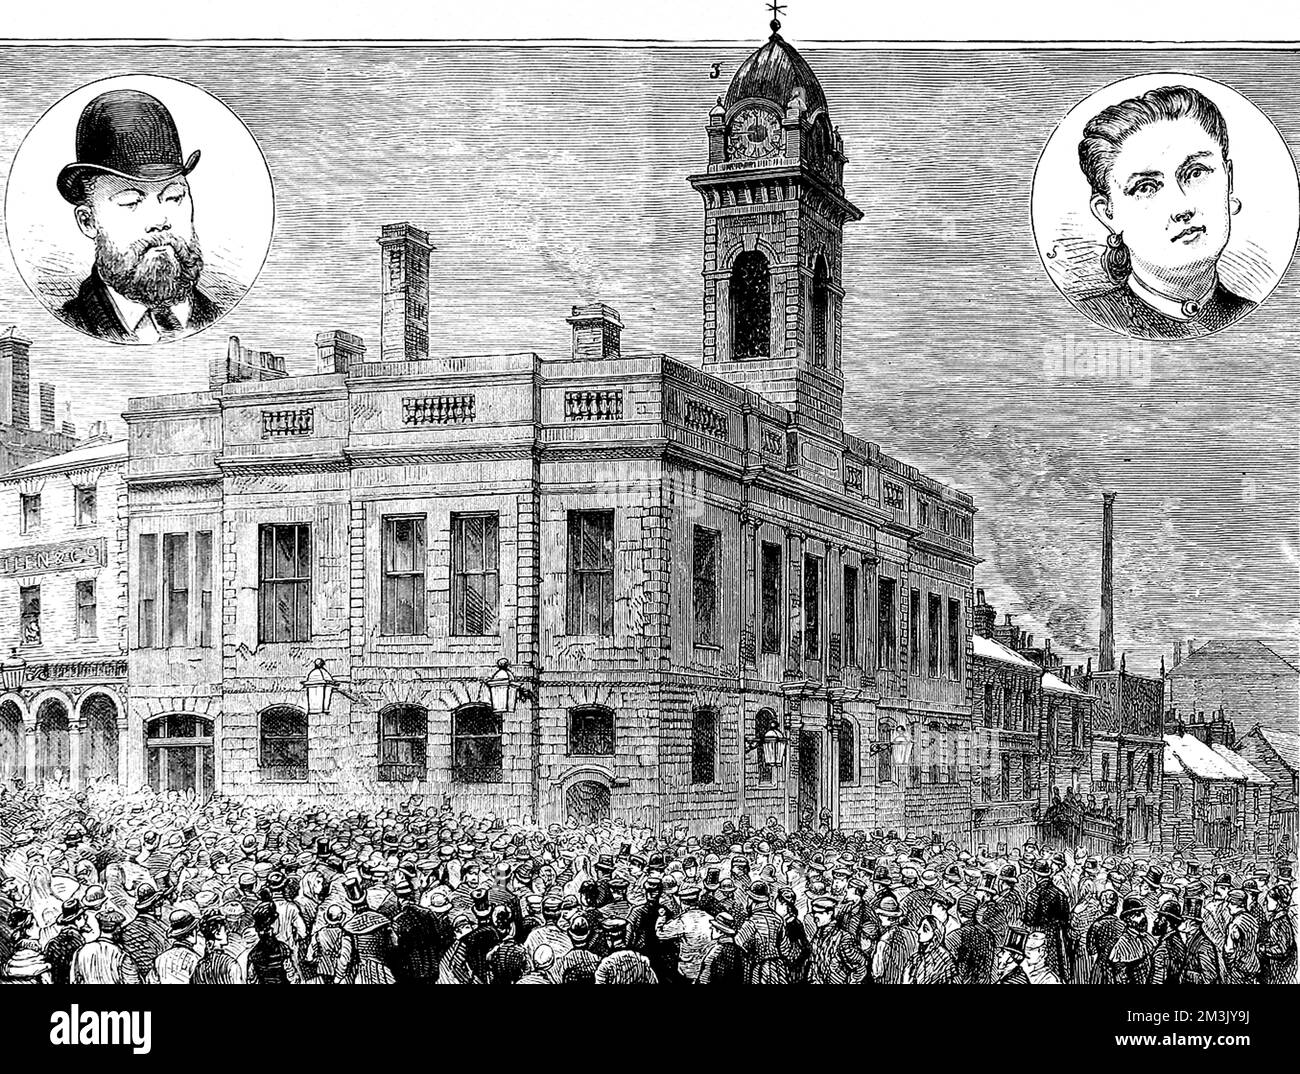 Scene as the prisoner, Charles Peace, arrives at the Town Hall, Sheffield. Pictured in the top left corner is Sergeant Robinson, the policeman who captured Peace and top right is Mrs Dyson, who had an affair with Peace.  Charles Peace was an infamous cat burglar and murderer who managed to evade arrest for an astonishing twenty years. Over this period Peace killed two policemen and the husband of a Mrs Dyson, with whom he had once had an affair. He was arrested for the attempted murder of a policeman, for which he gave a false name, but he was recognised and charged for all his crimes. With a Stock Photo